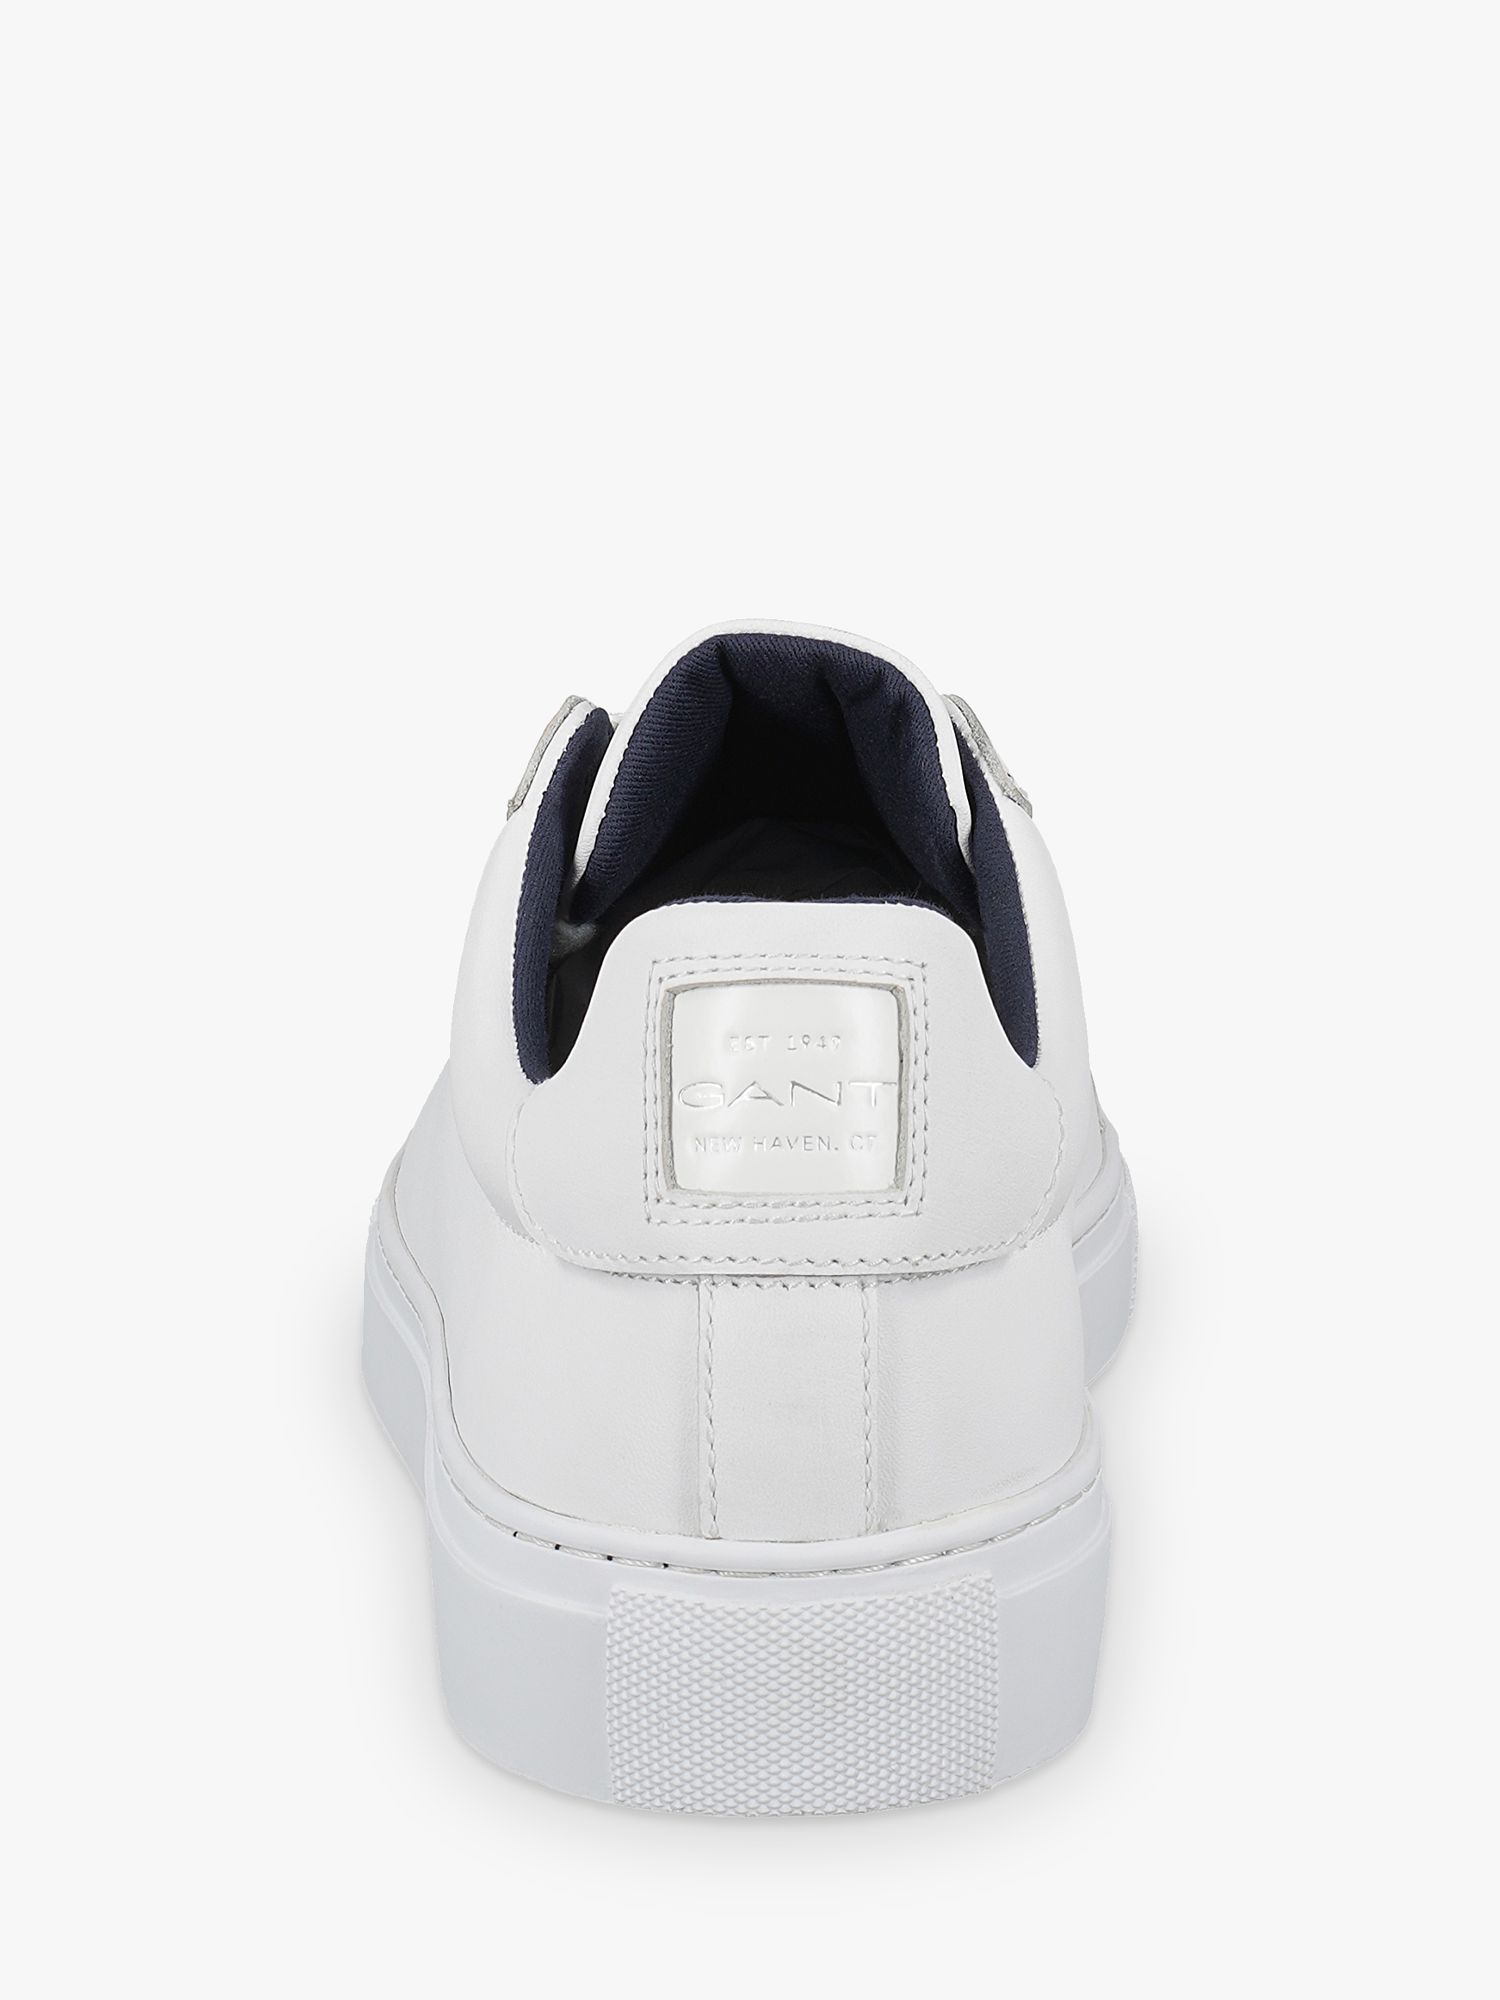 GANT Mc Julien Leather Trainers, Bright White at John Lewis & Partners